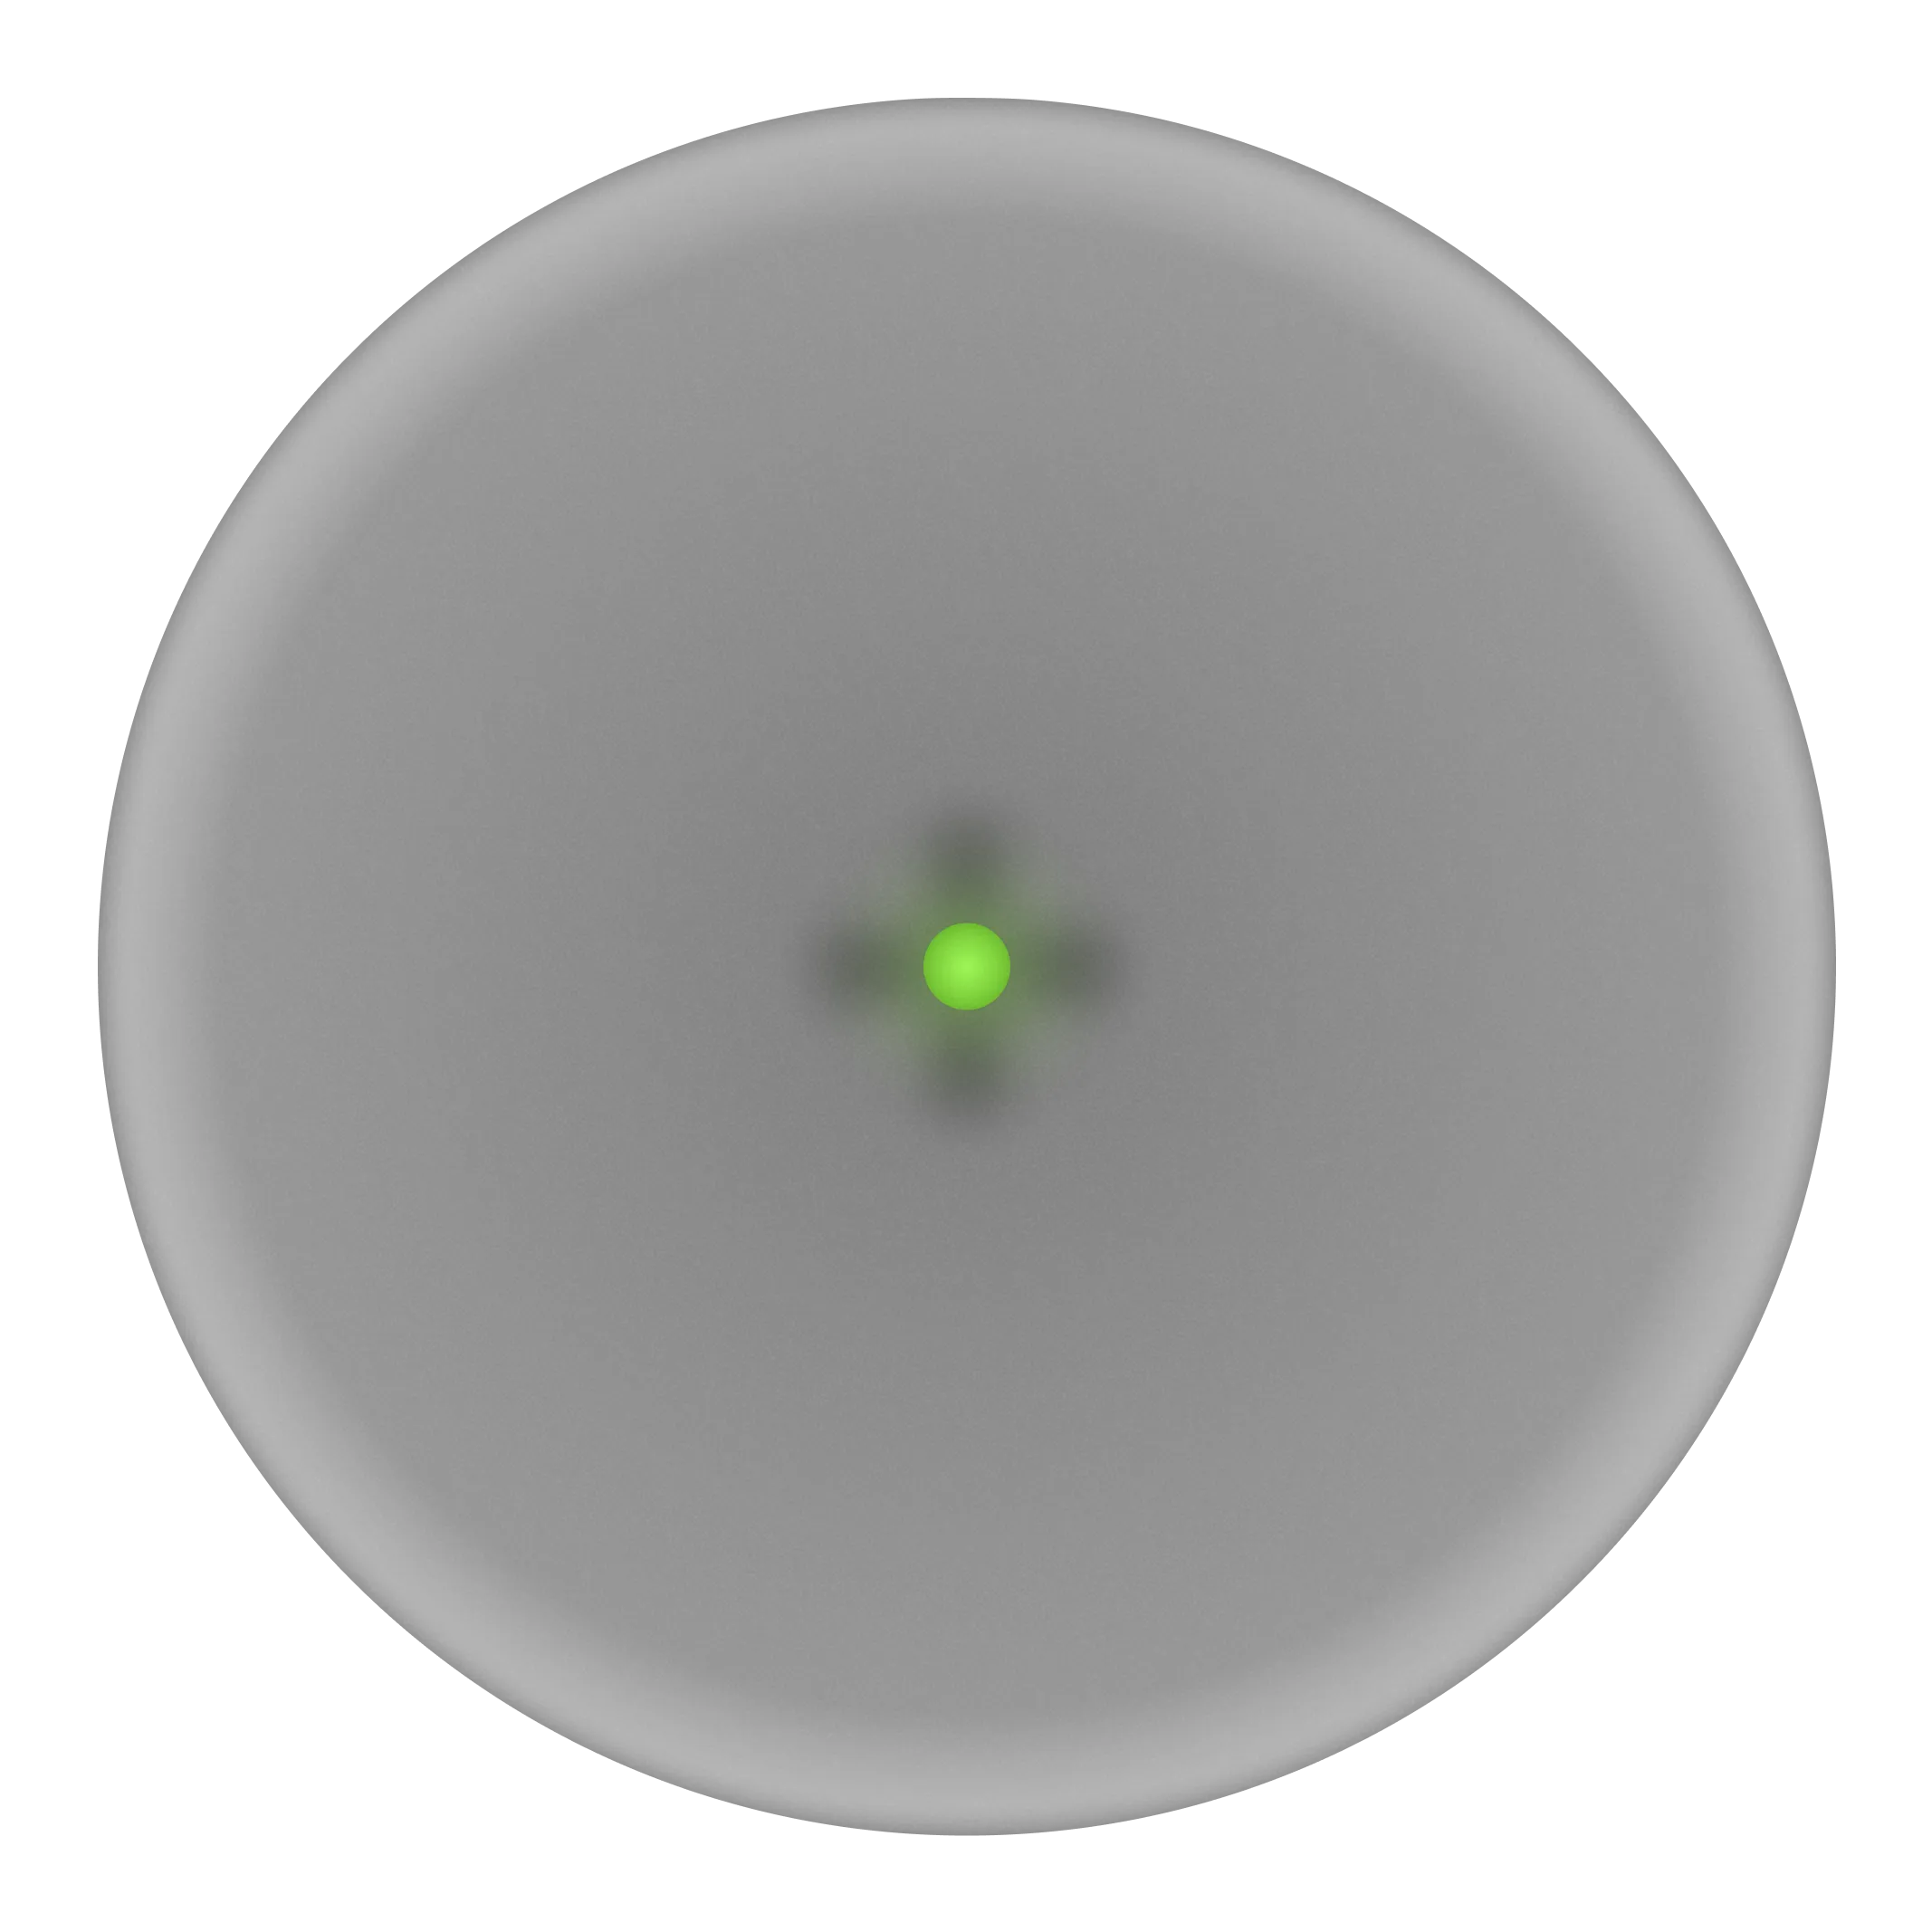 rounded clear object with a glowing dot in the center